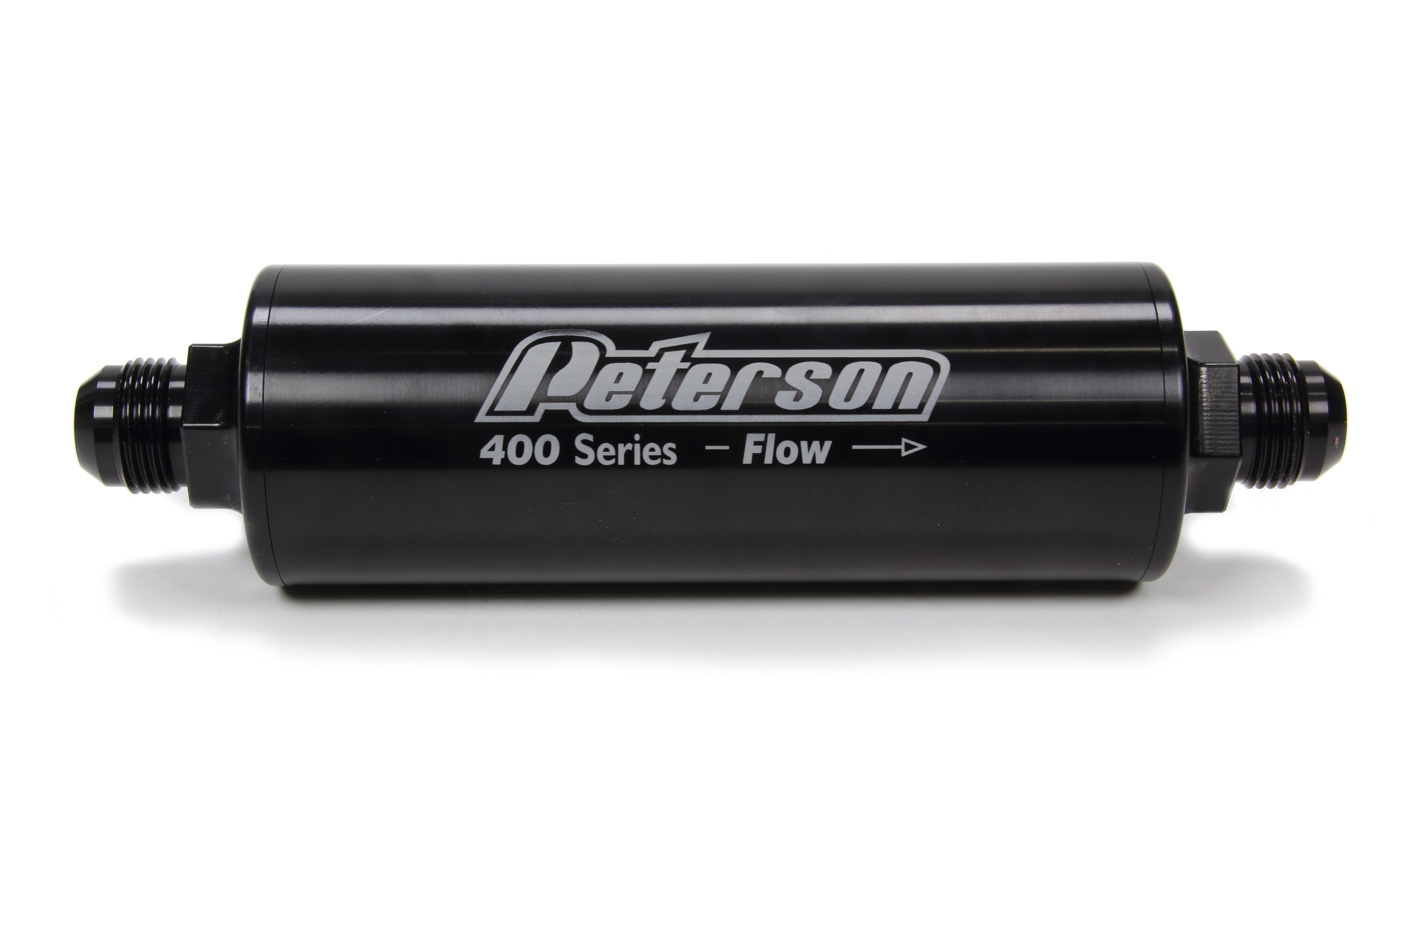 Peterson Fluid 09-0452 Fuel / Oil Filter, 400 Series, In-Line, 60 Micron Stainless Screen, 12 AN Male Inlet, 12 AN Male Outlet, Bypass, Aluminum, Black Anodized, Each